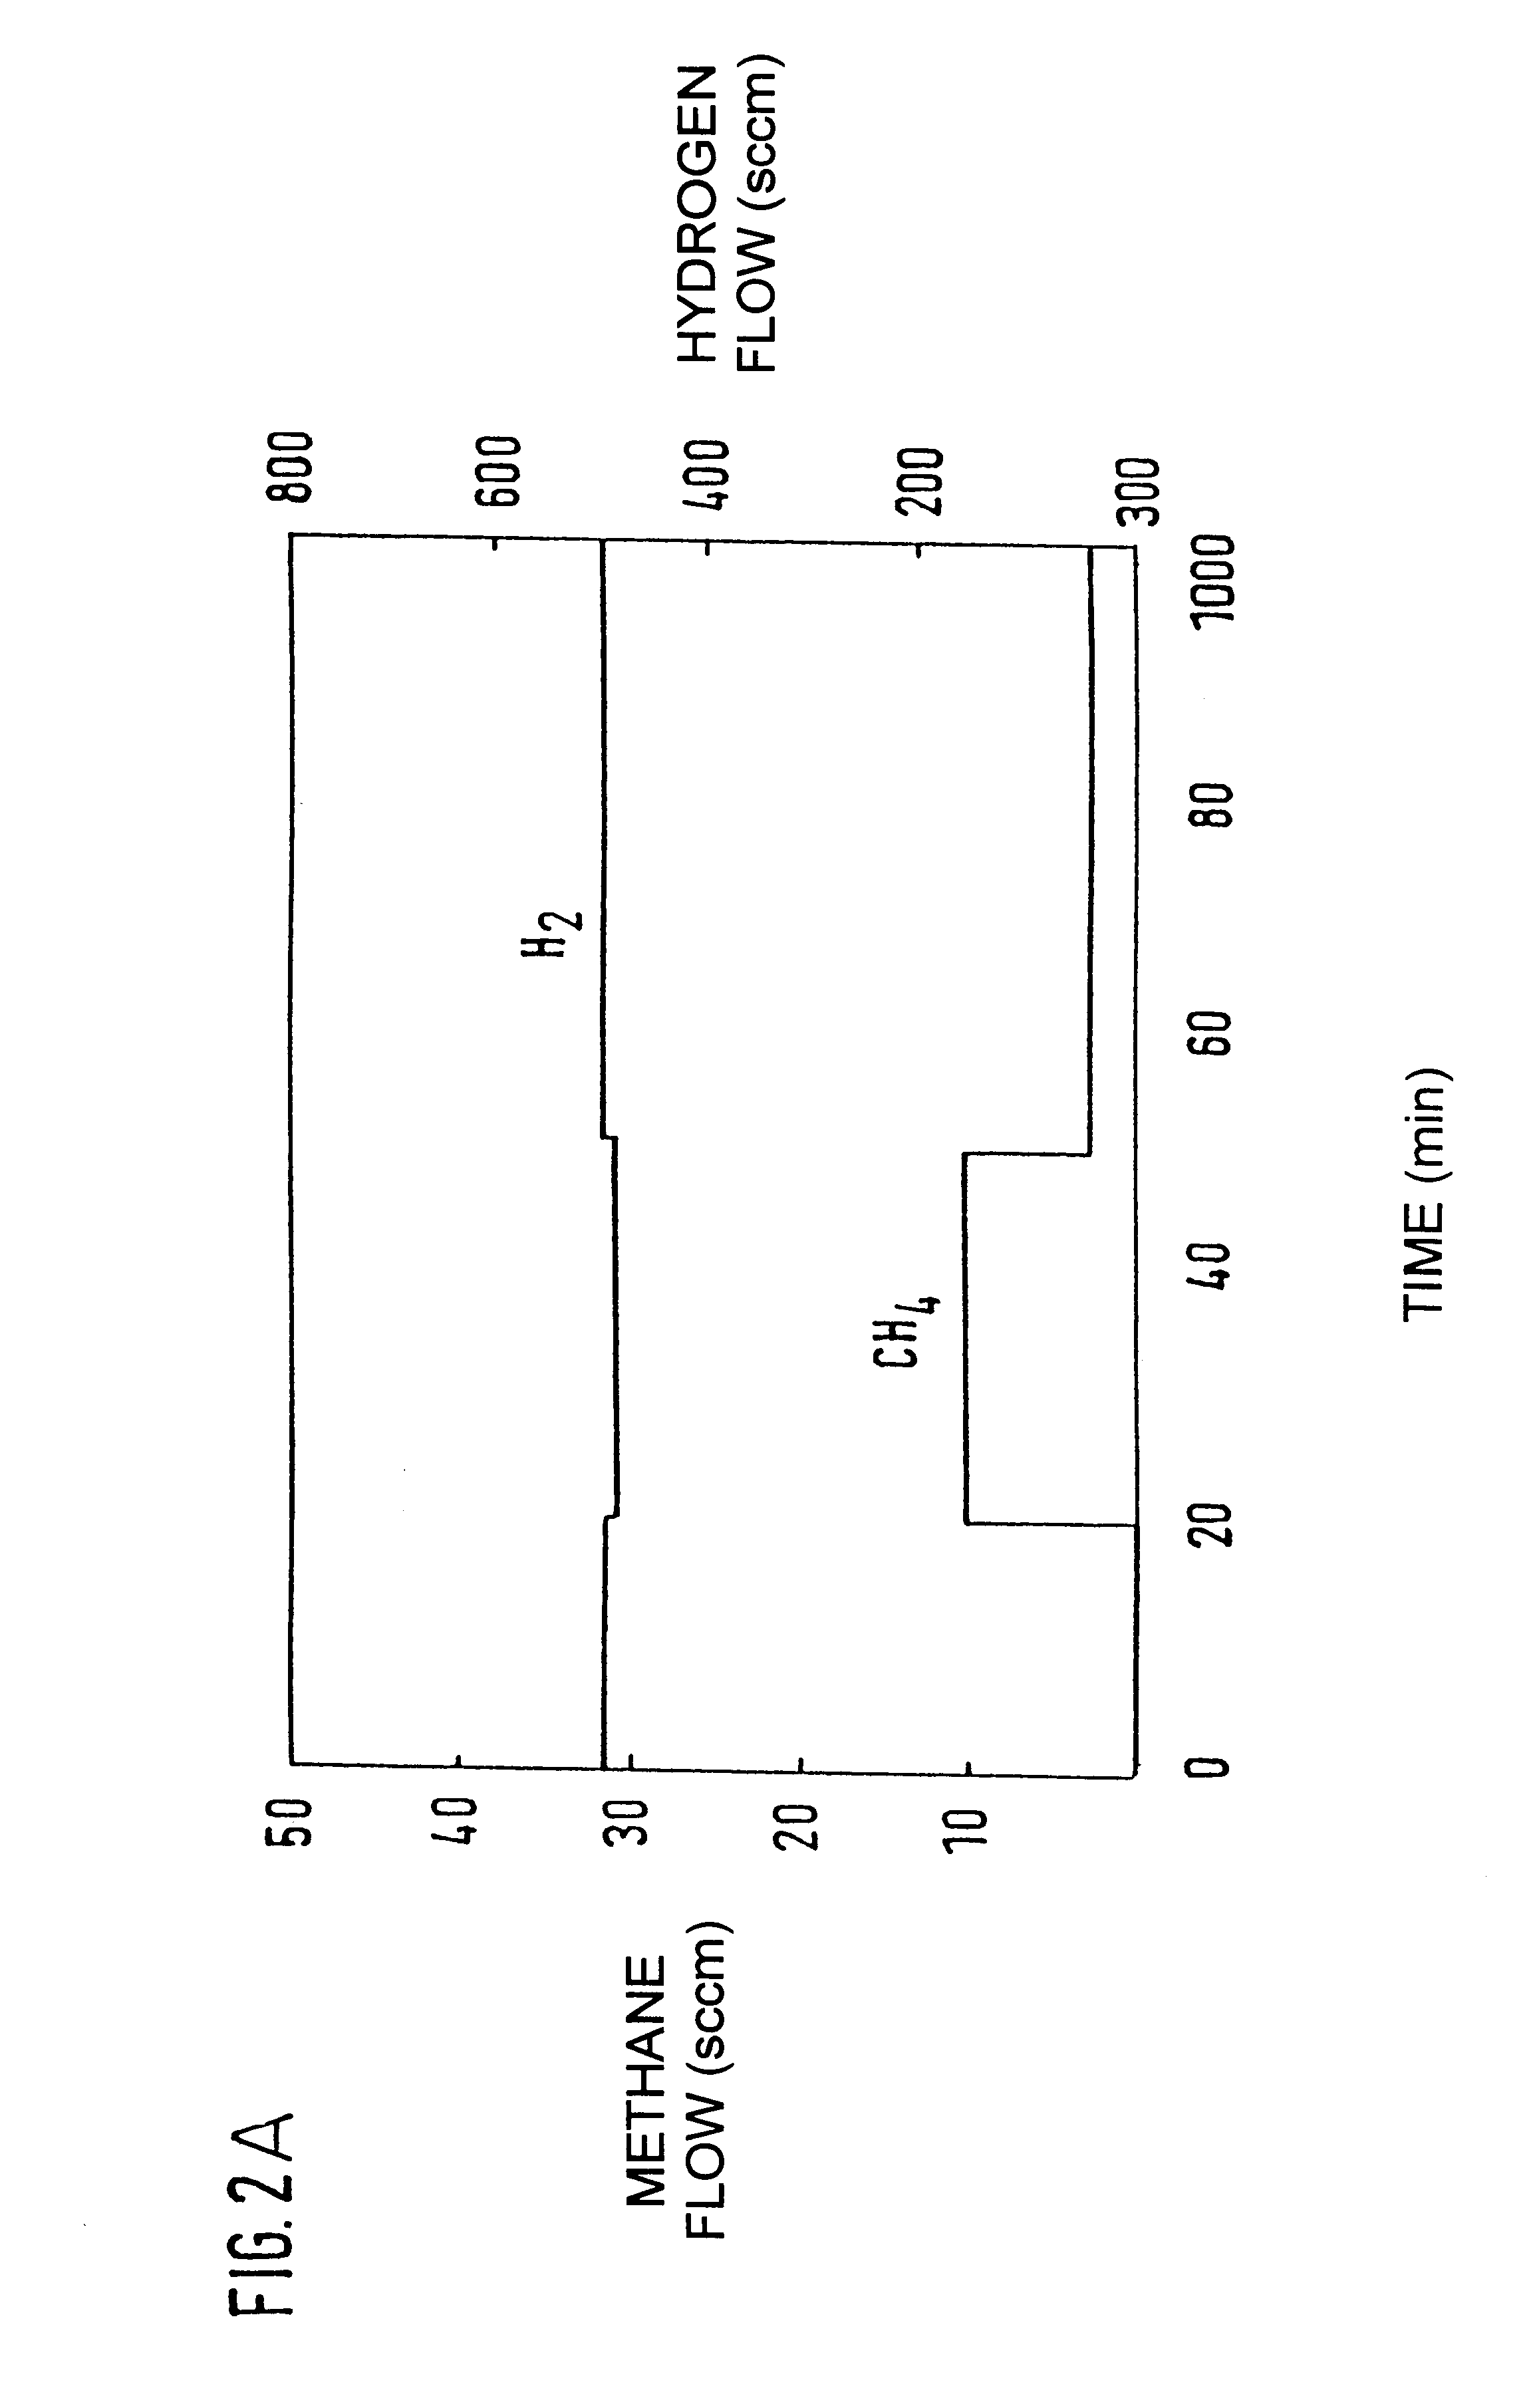 Process for producing heteropitaxial diamond layers on Si-substrates